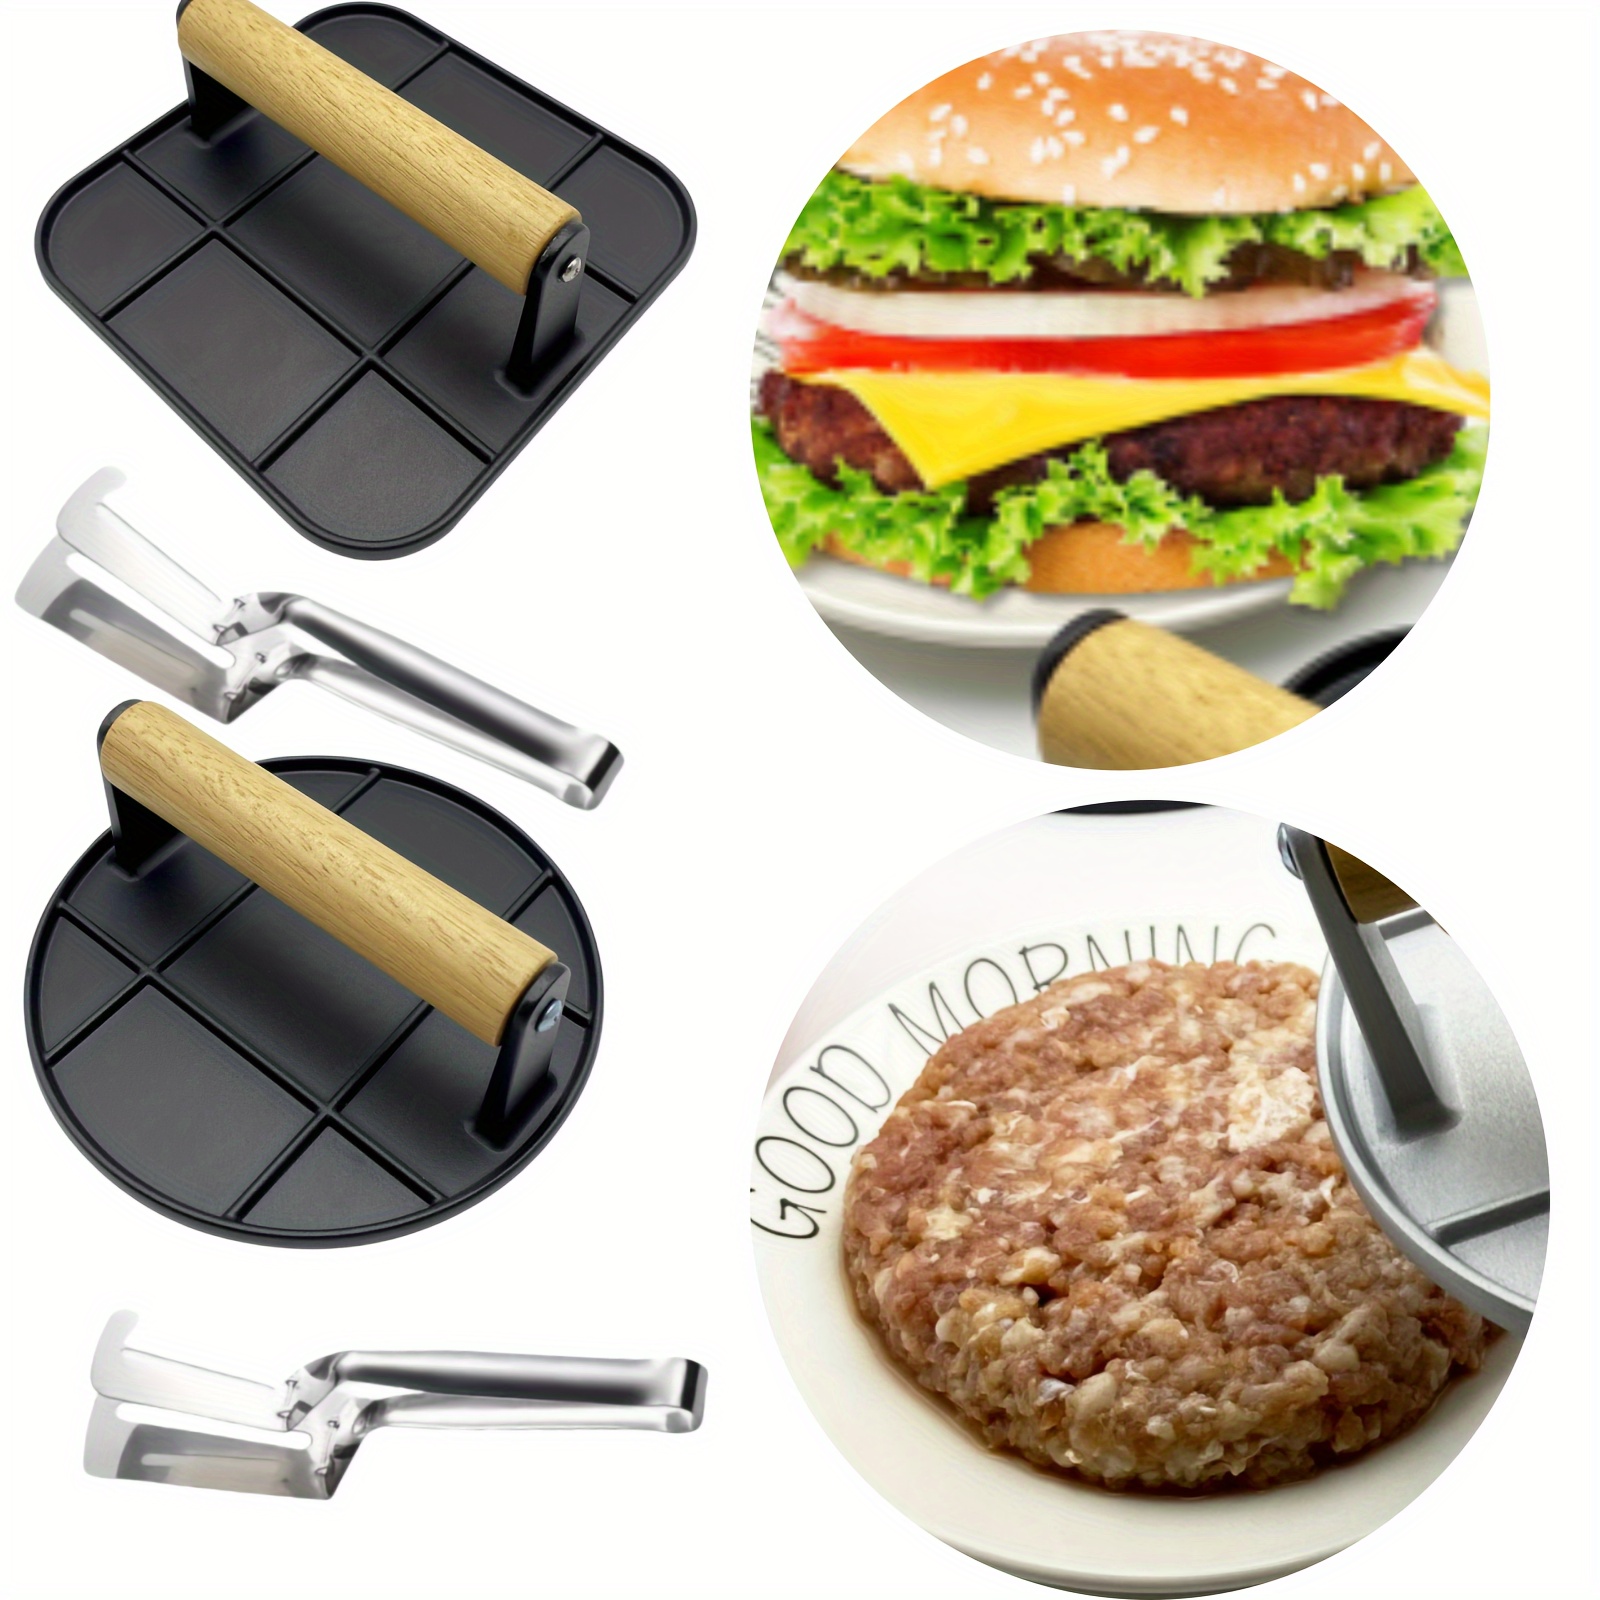 

2 Pieces Heavy Duty Cast Iron Hamburger Press With Wooden Handles - Perfect For Grilling, Sandwiches, And - Kitchen Essentials